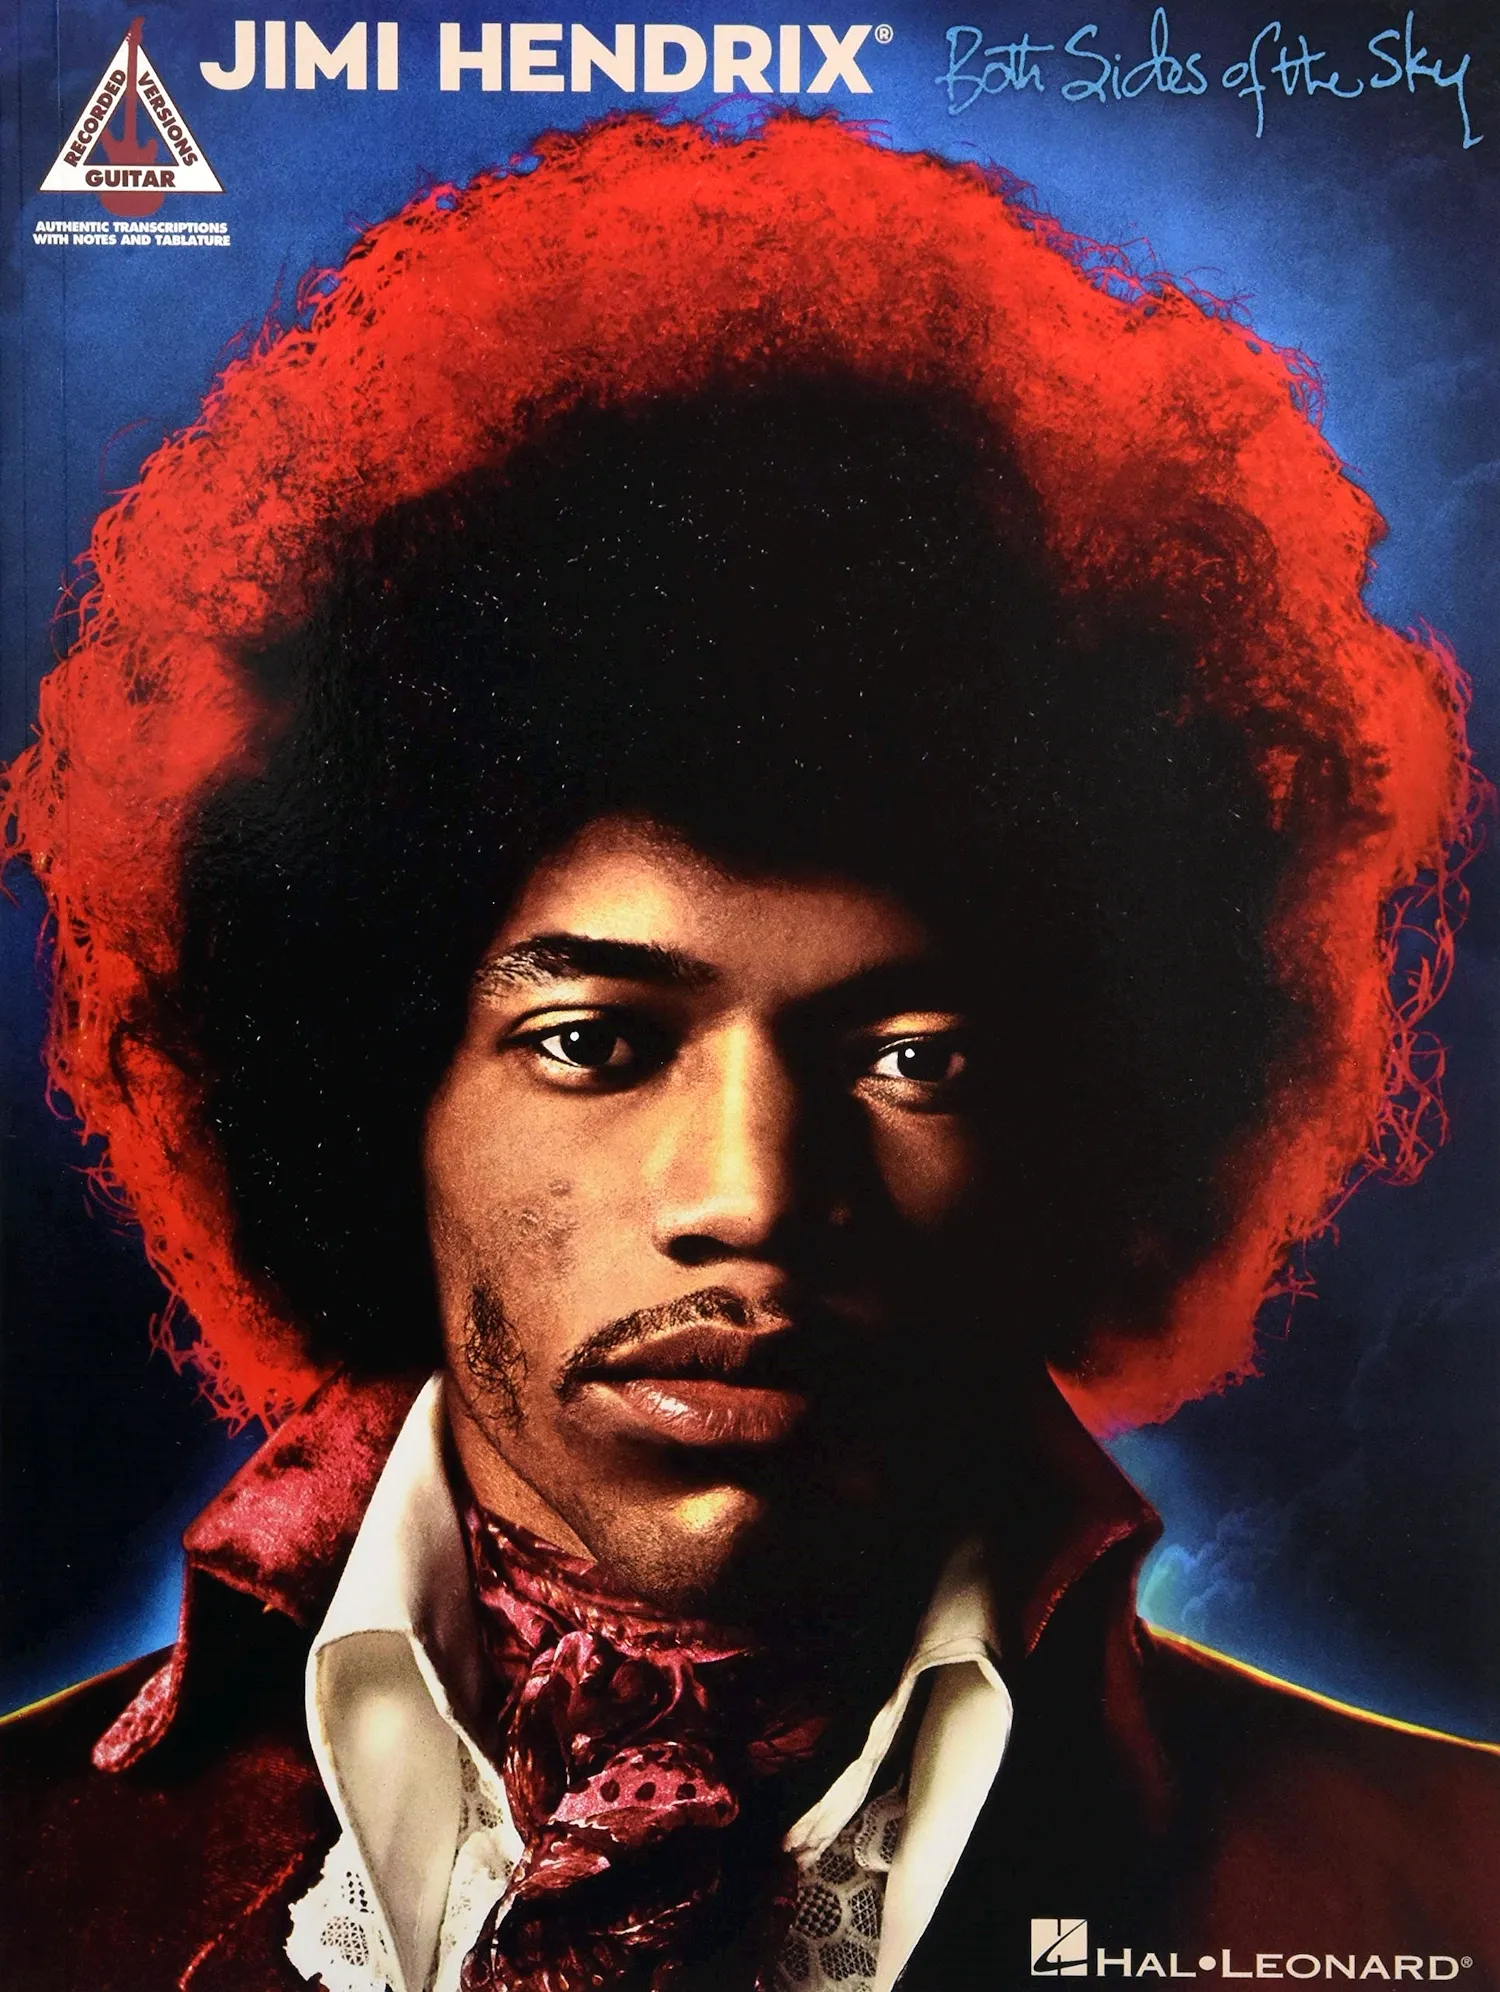 Jimi Hendrix both Sides of the Sky 2018